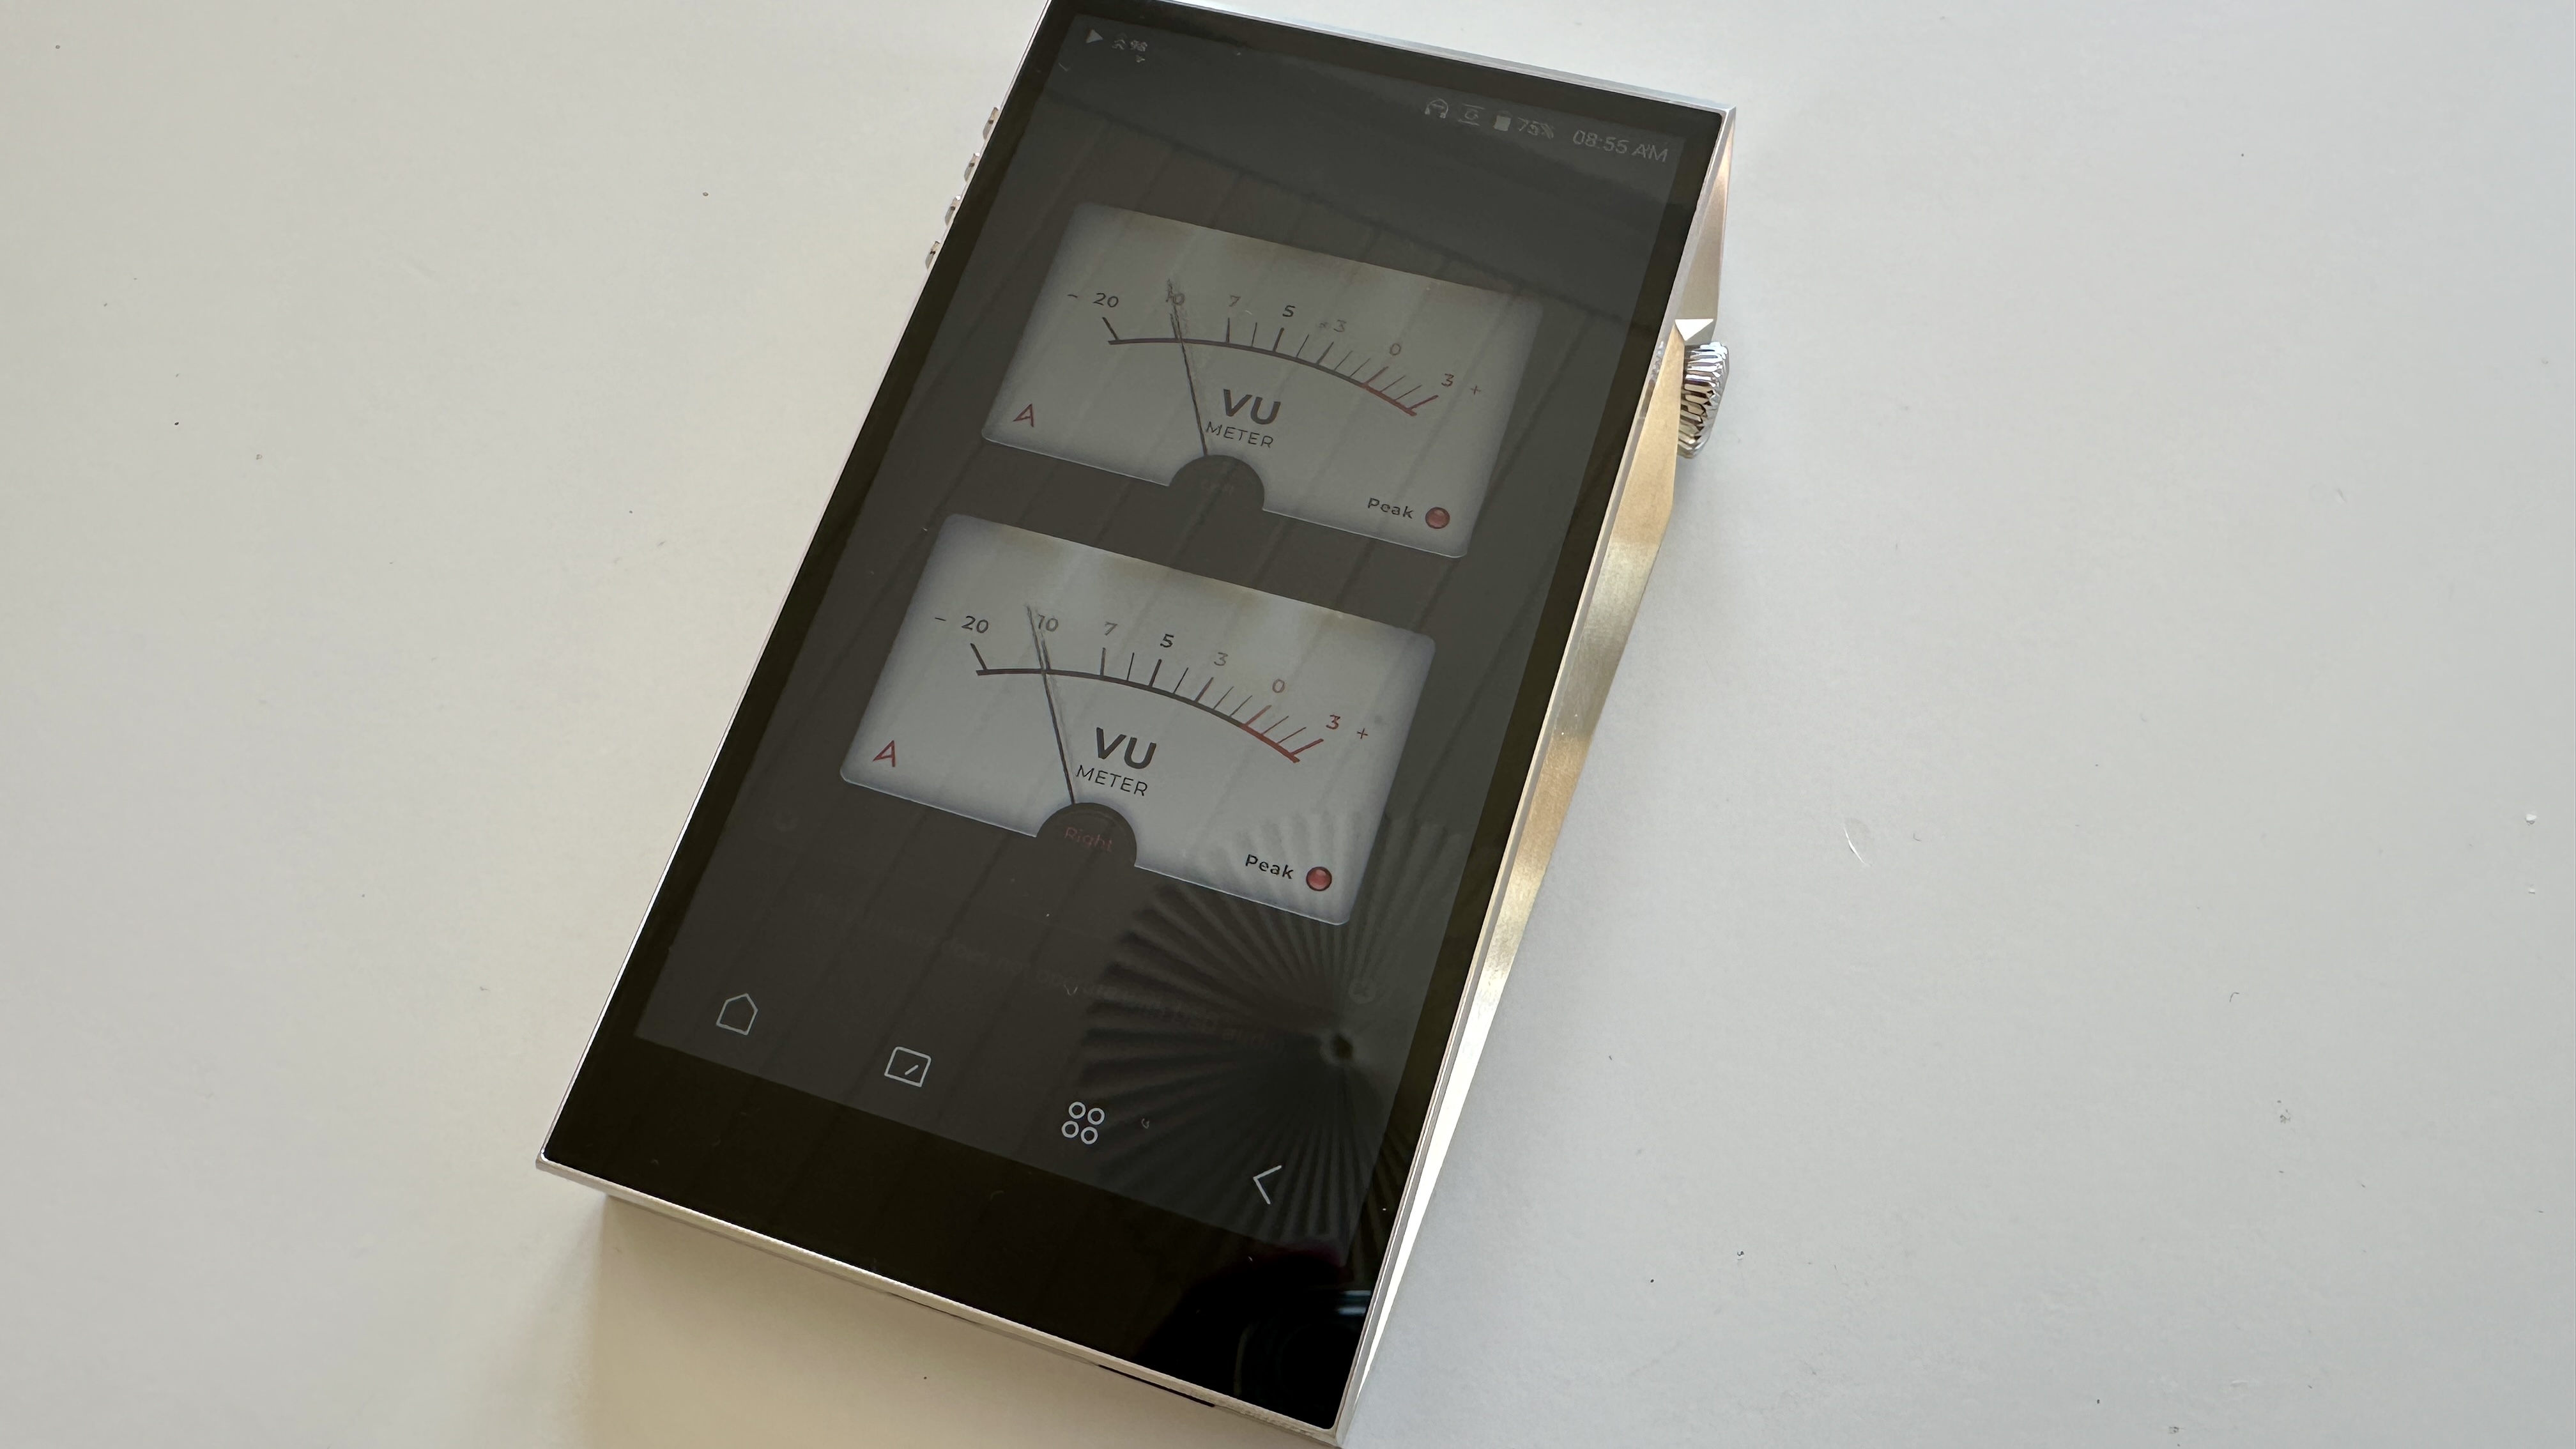 Astell & Kern A&ultima SP3000T portable music player displaying adjustable volume levels